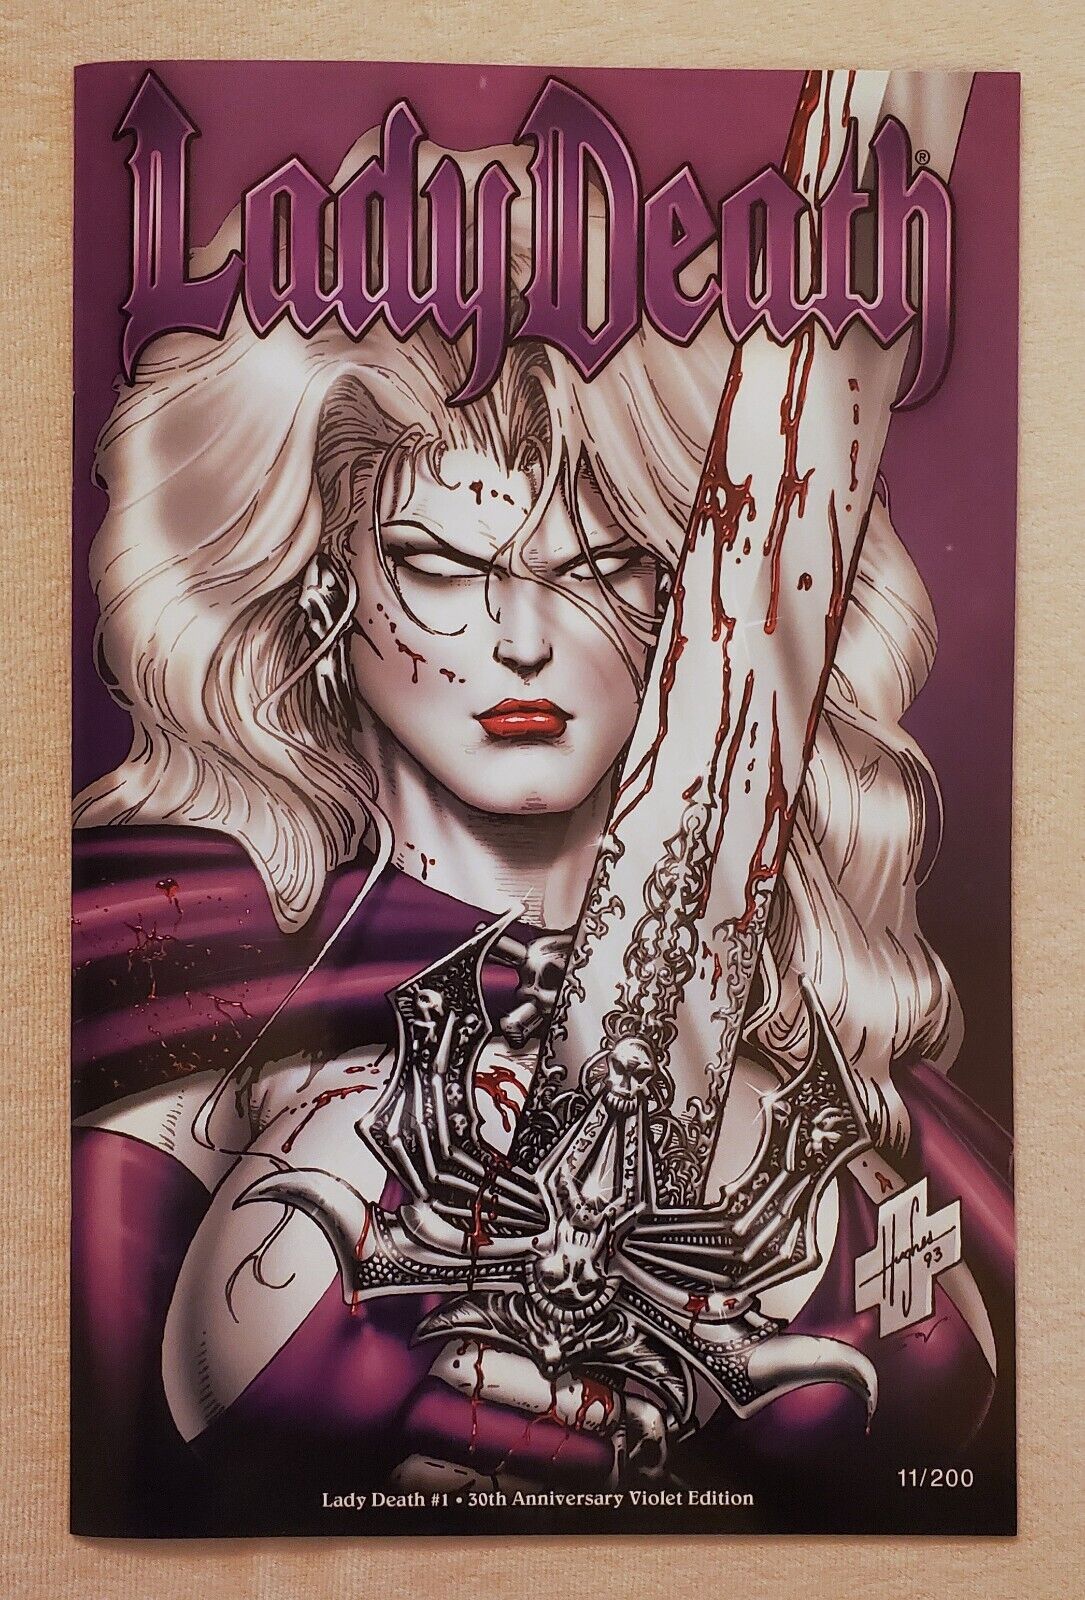 Lady Death: The Reckoning 30th Anniversary Violet Edition, Steven Hughes NM